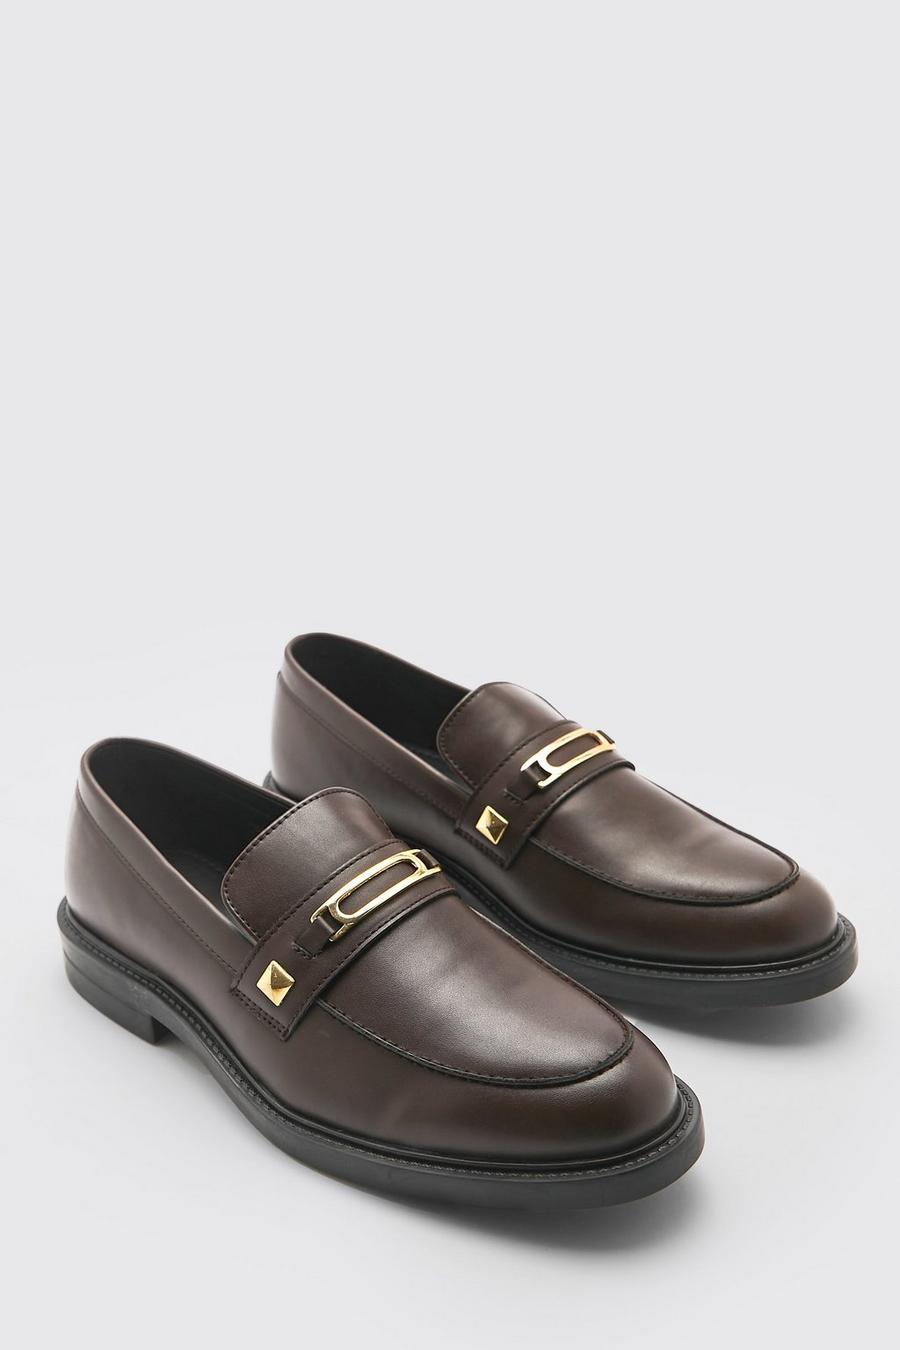 Chocolate marron Metal Work Penny Loafers